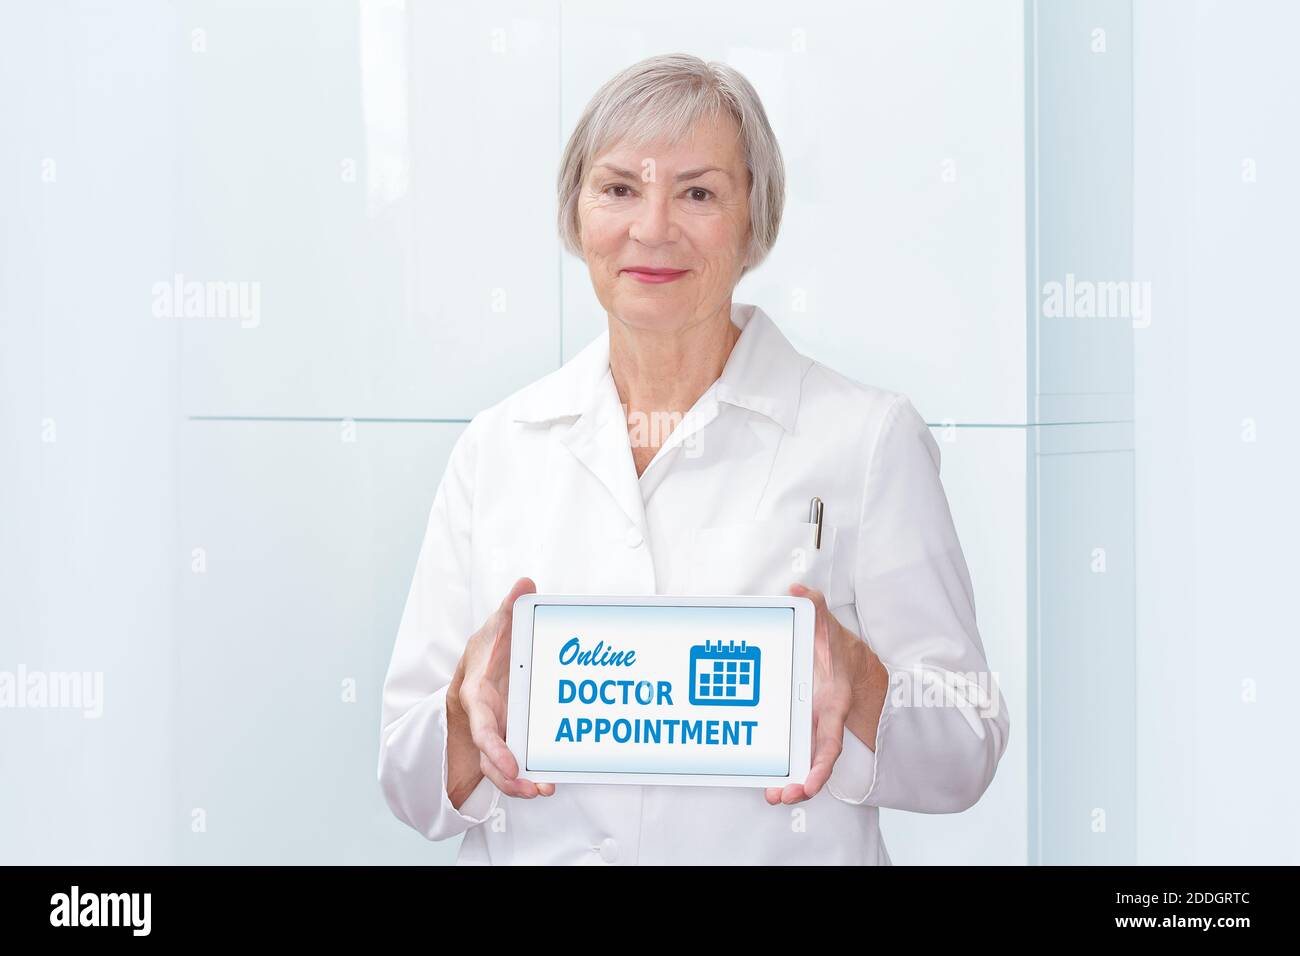 Friendly senior doctor showing a tablet computer with the text: online doctor appointment, light background. Stock Photo